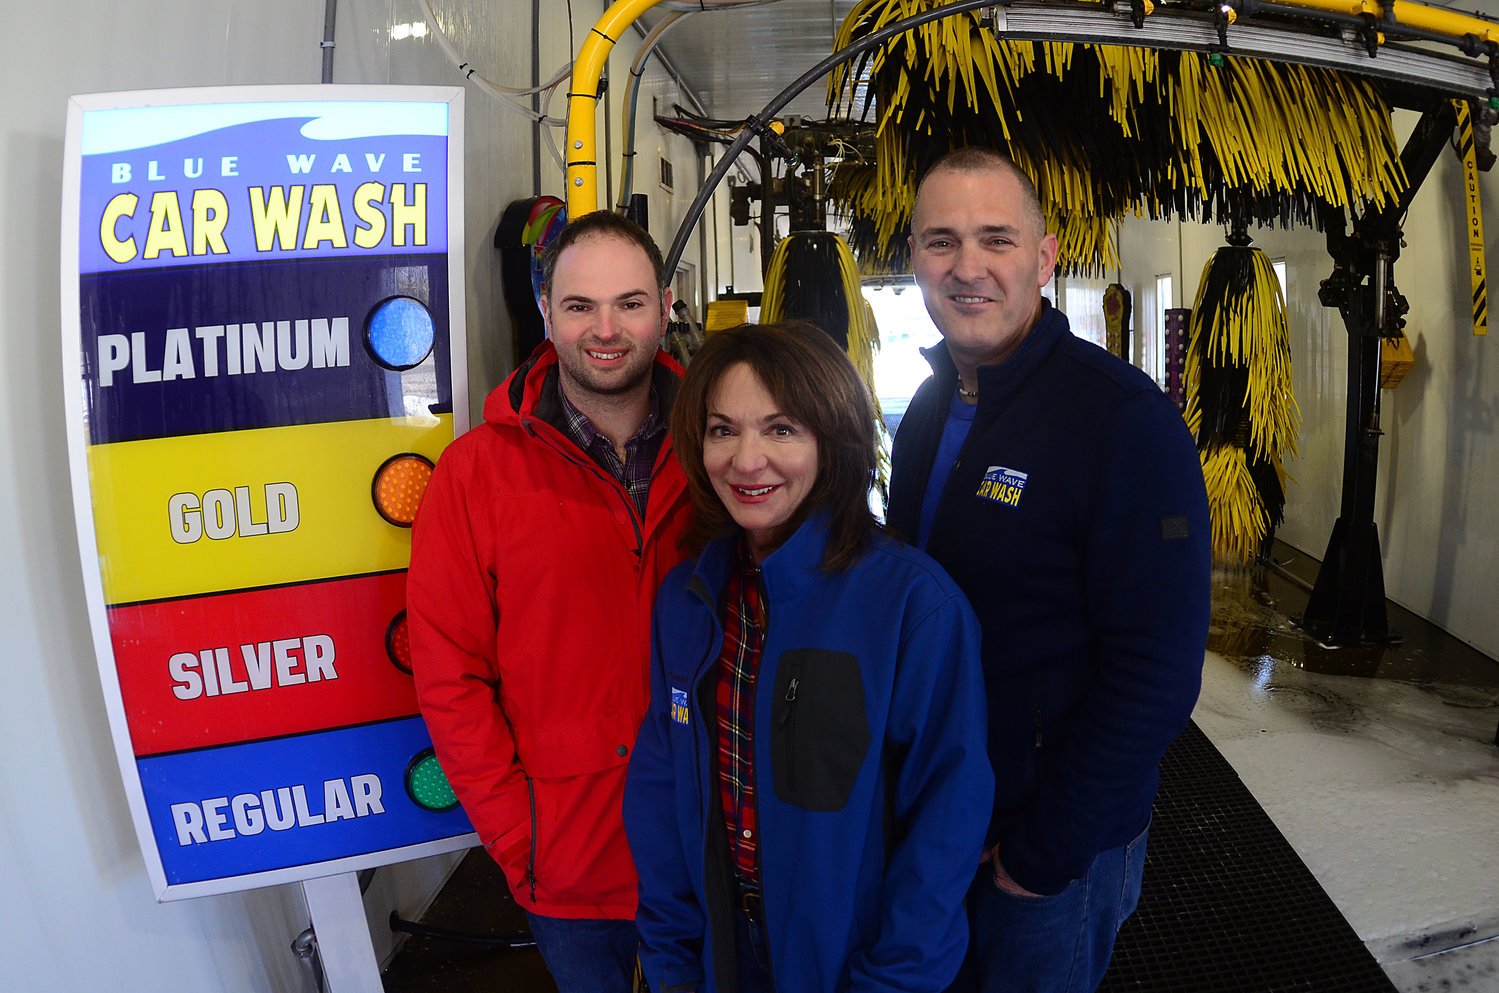 Blue Wave owner Yvonne Blackman (middle) poses with son David Blackman (left) and manager Pete Fabiano inside the car wash.